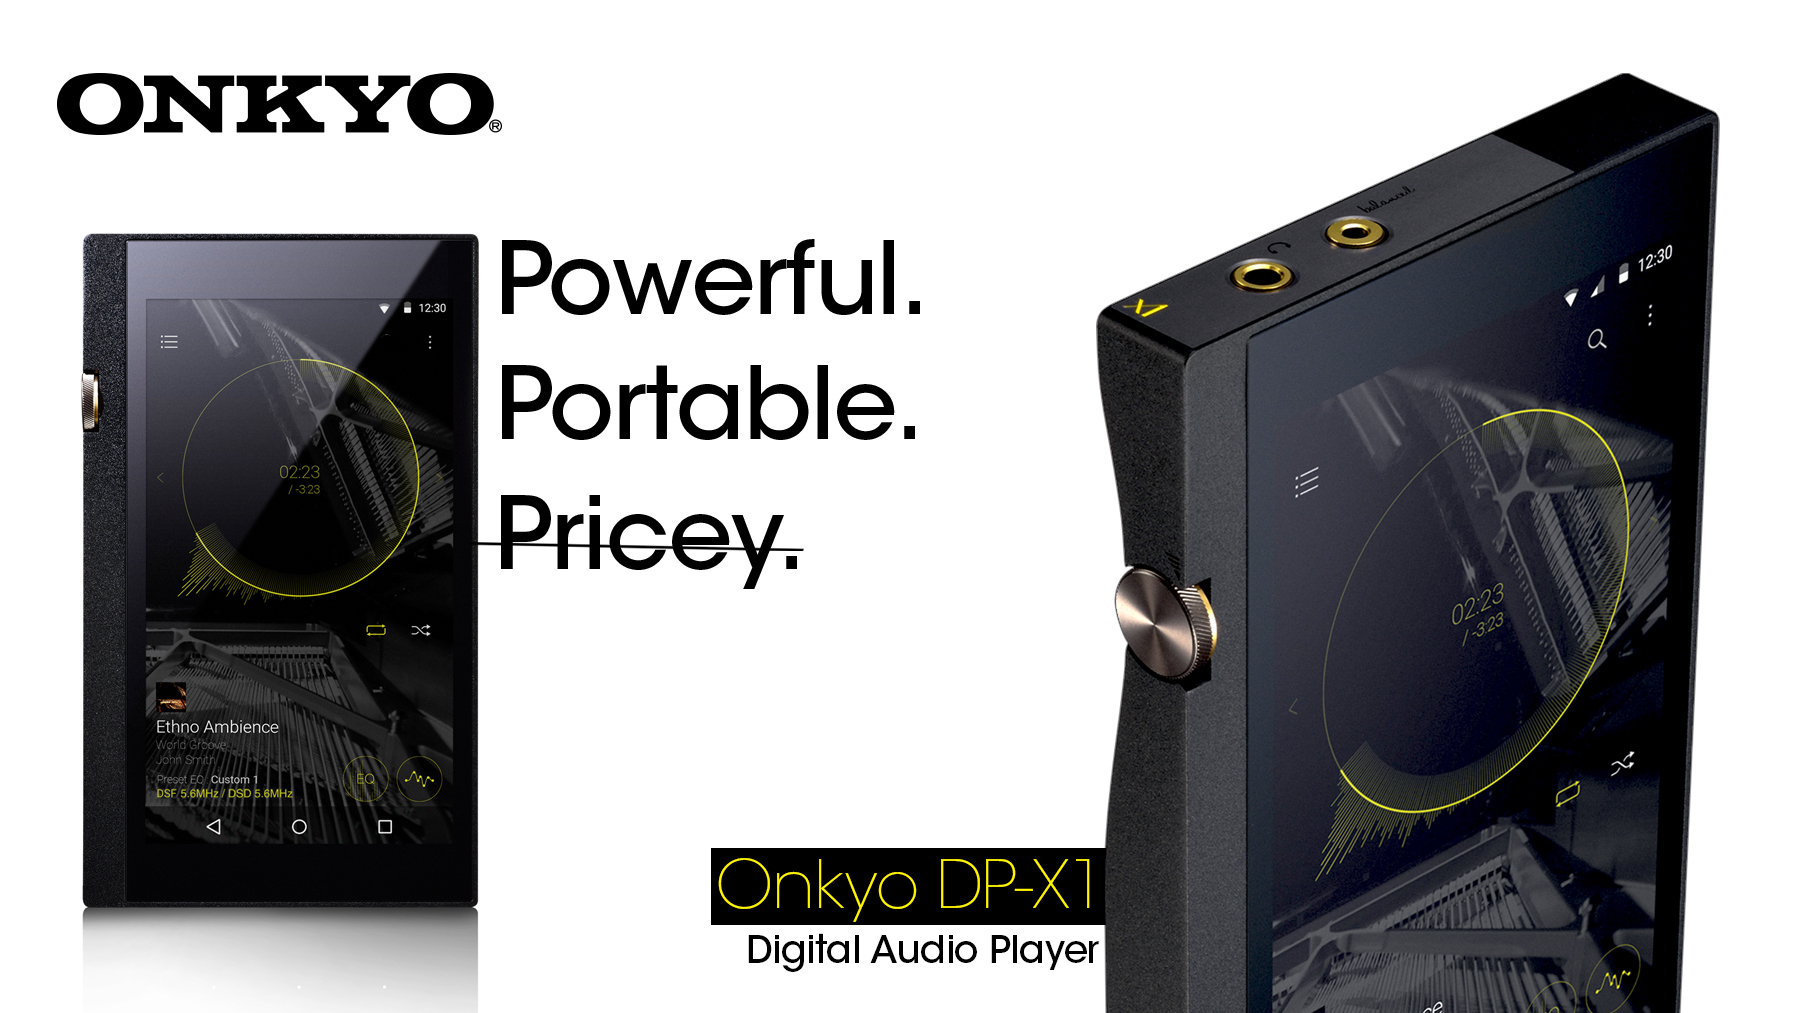 Onkyo’s New Hi-Res Portable Player Changes The Game